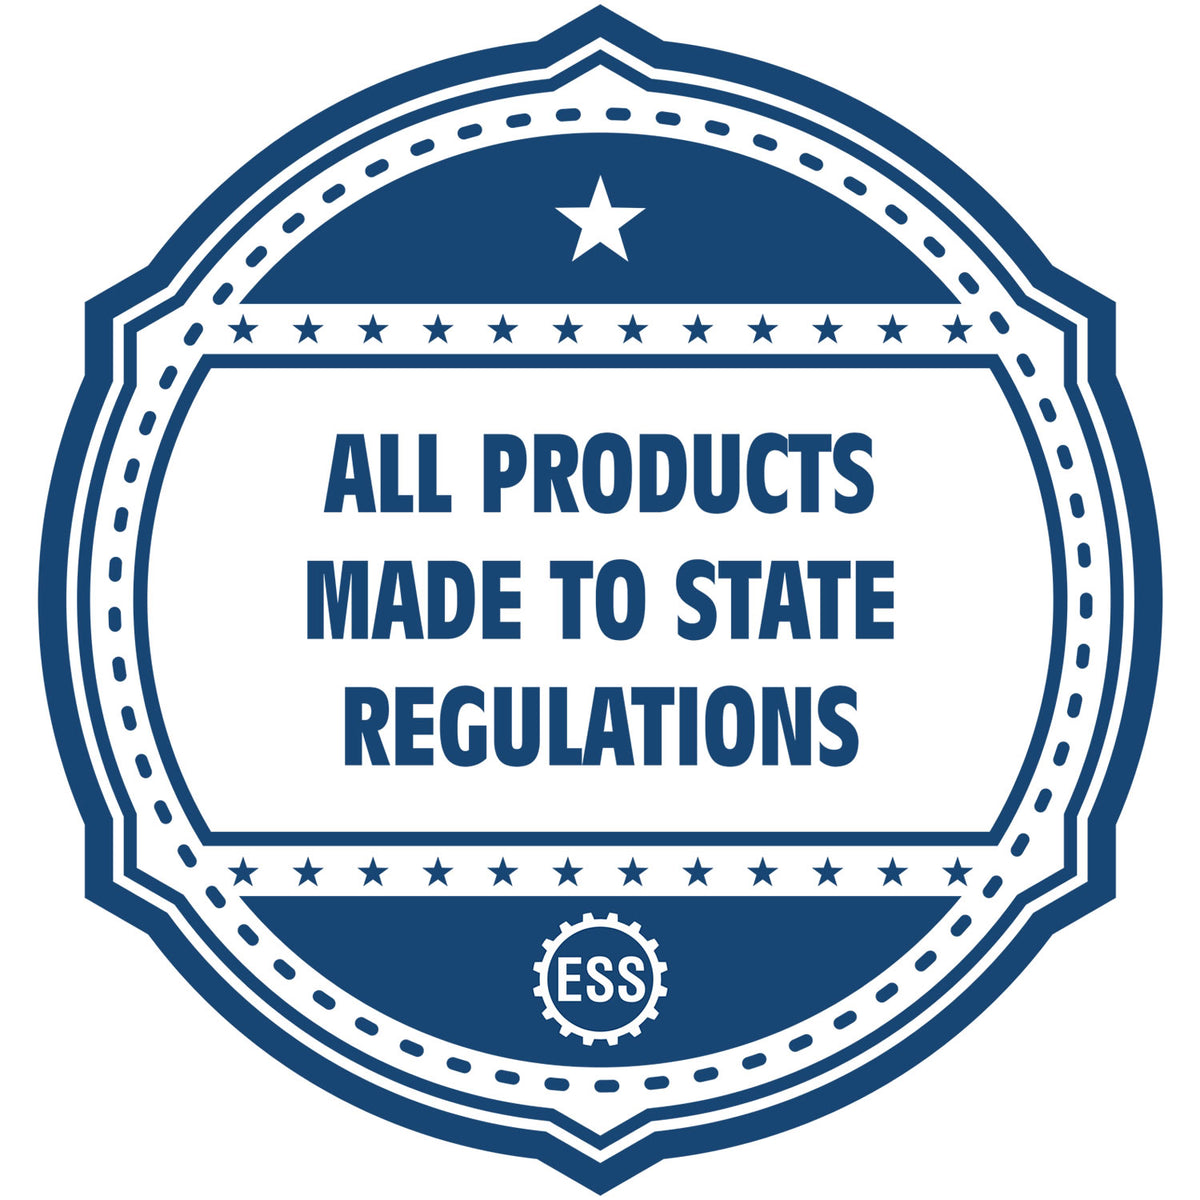 An icon or badge element for the Slim Pre-Inked Kansas Professional Engineer Seal Stamp showing that this product is made in compliance with state regulations.